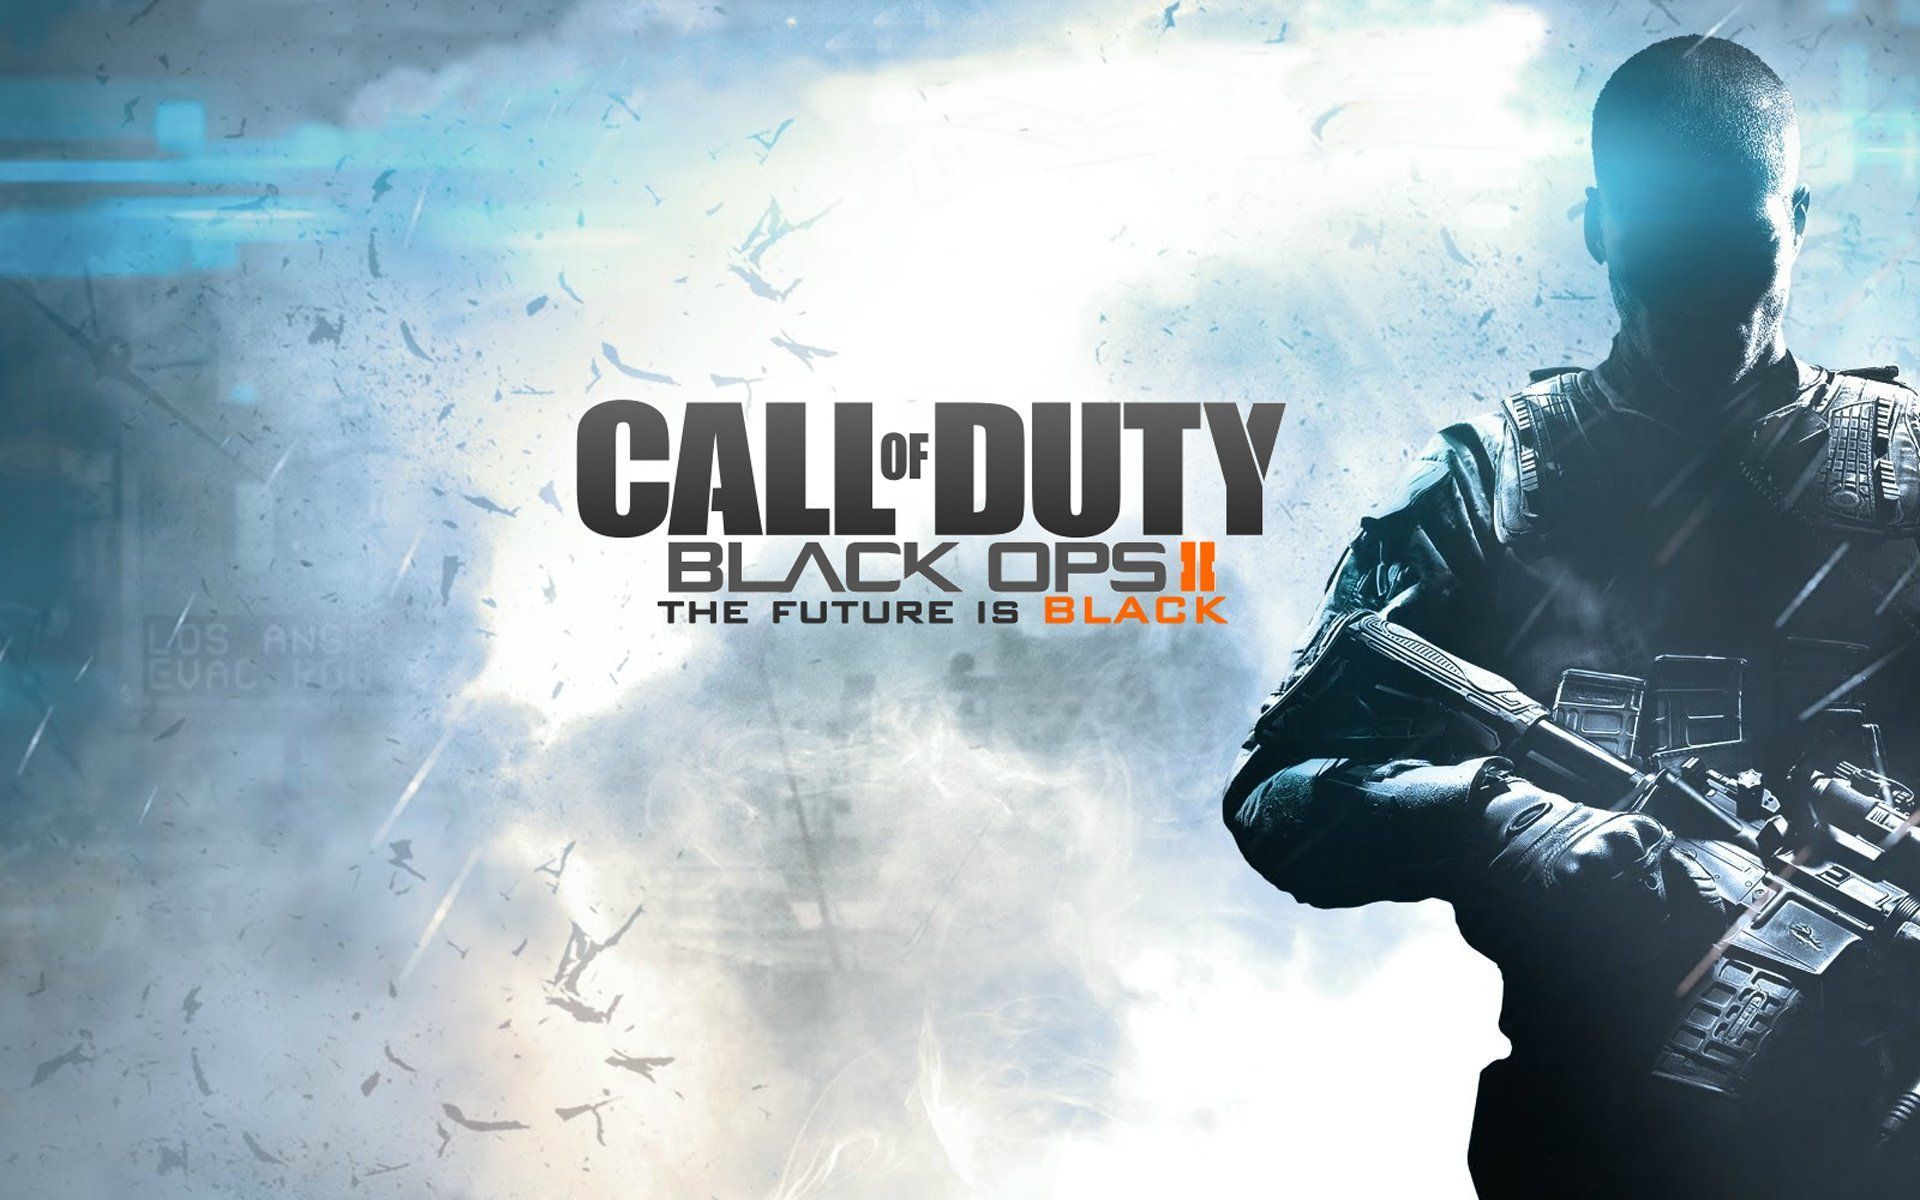 Call of Duty Black Ops 2 Wallpaper Free Call of Duty Black Ops 2 Background